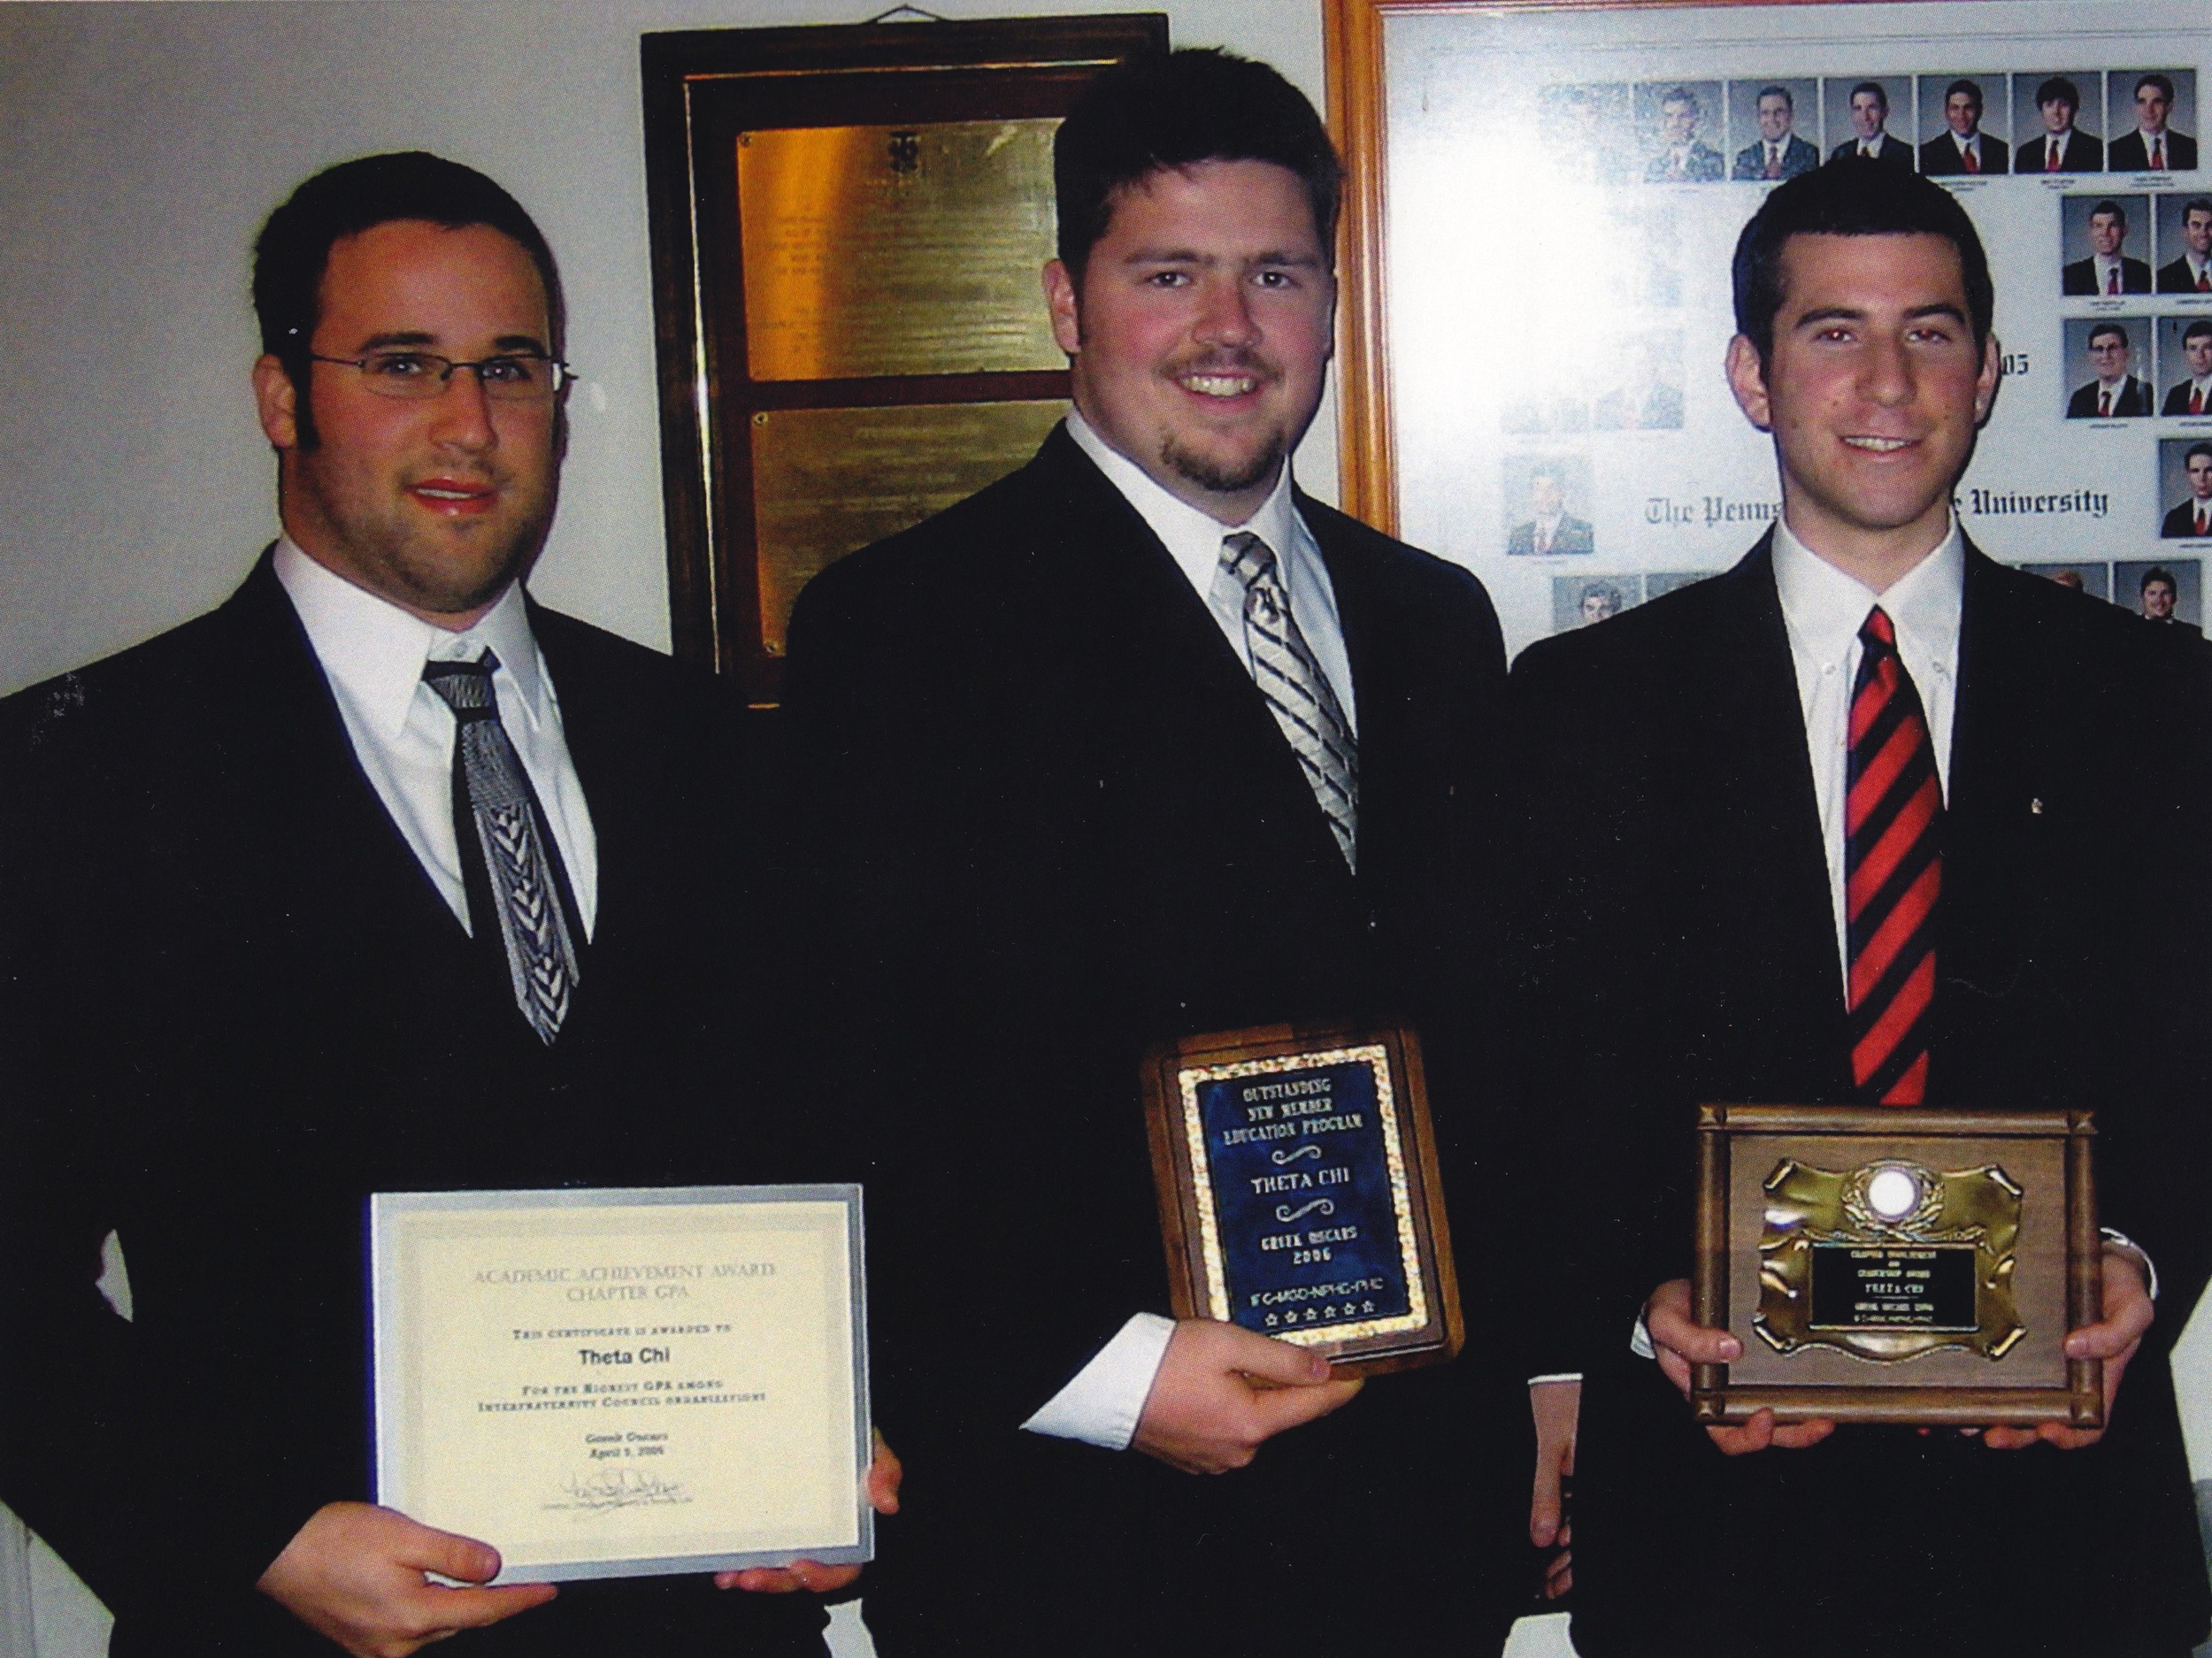  L to R: Jacob Wolf, Chris Haggerty and Robert Blumstein
2006 